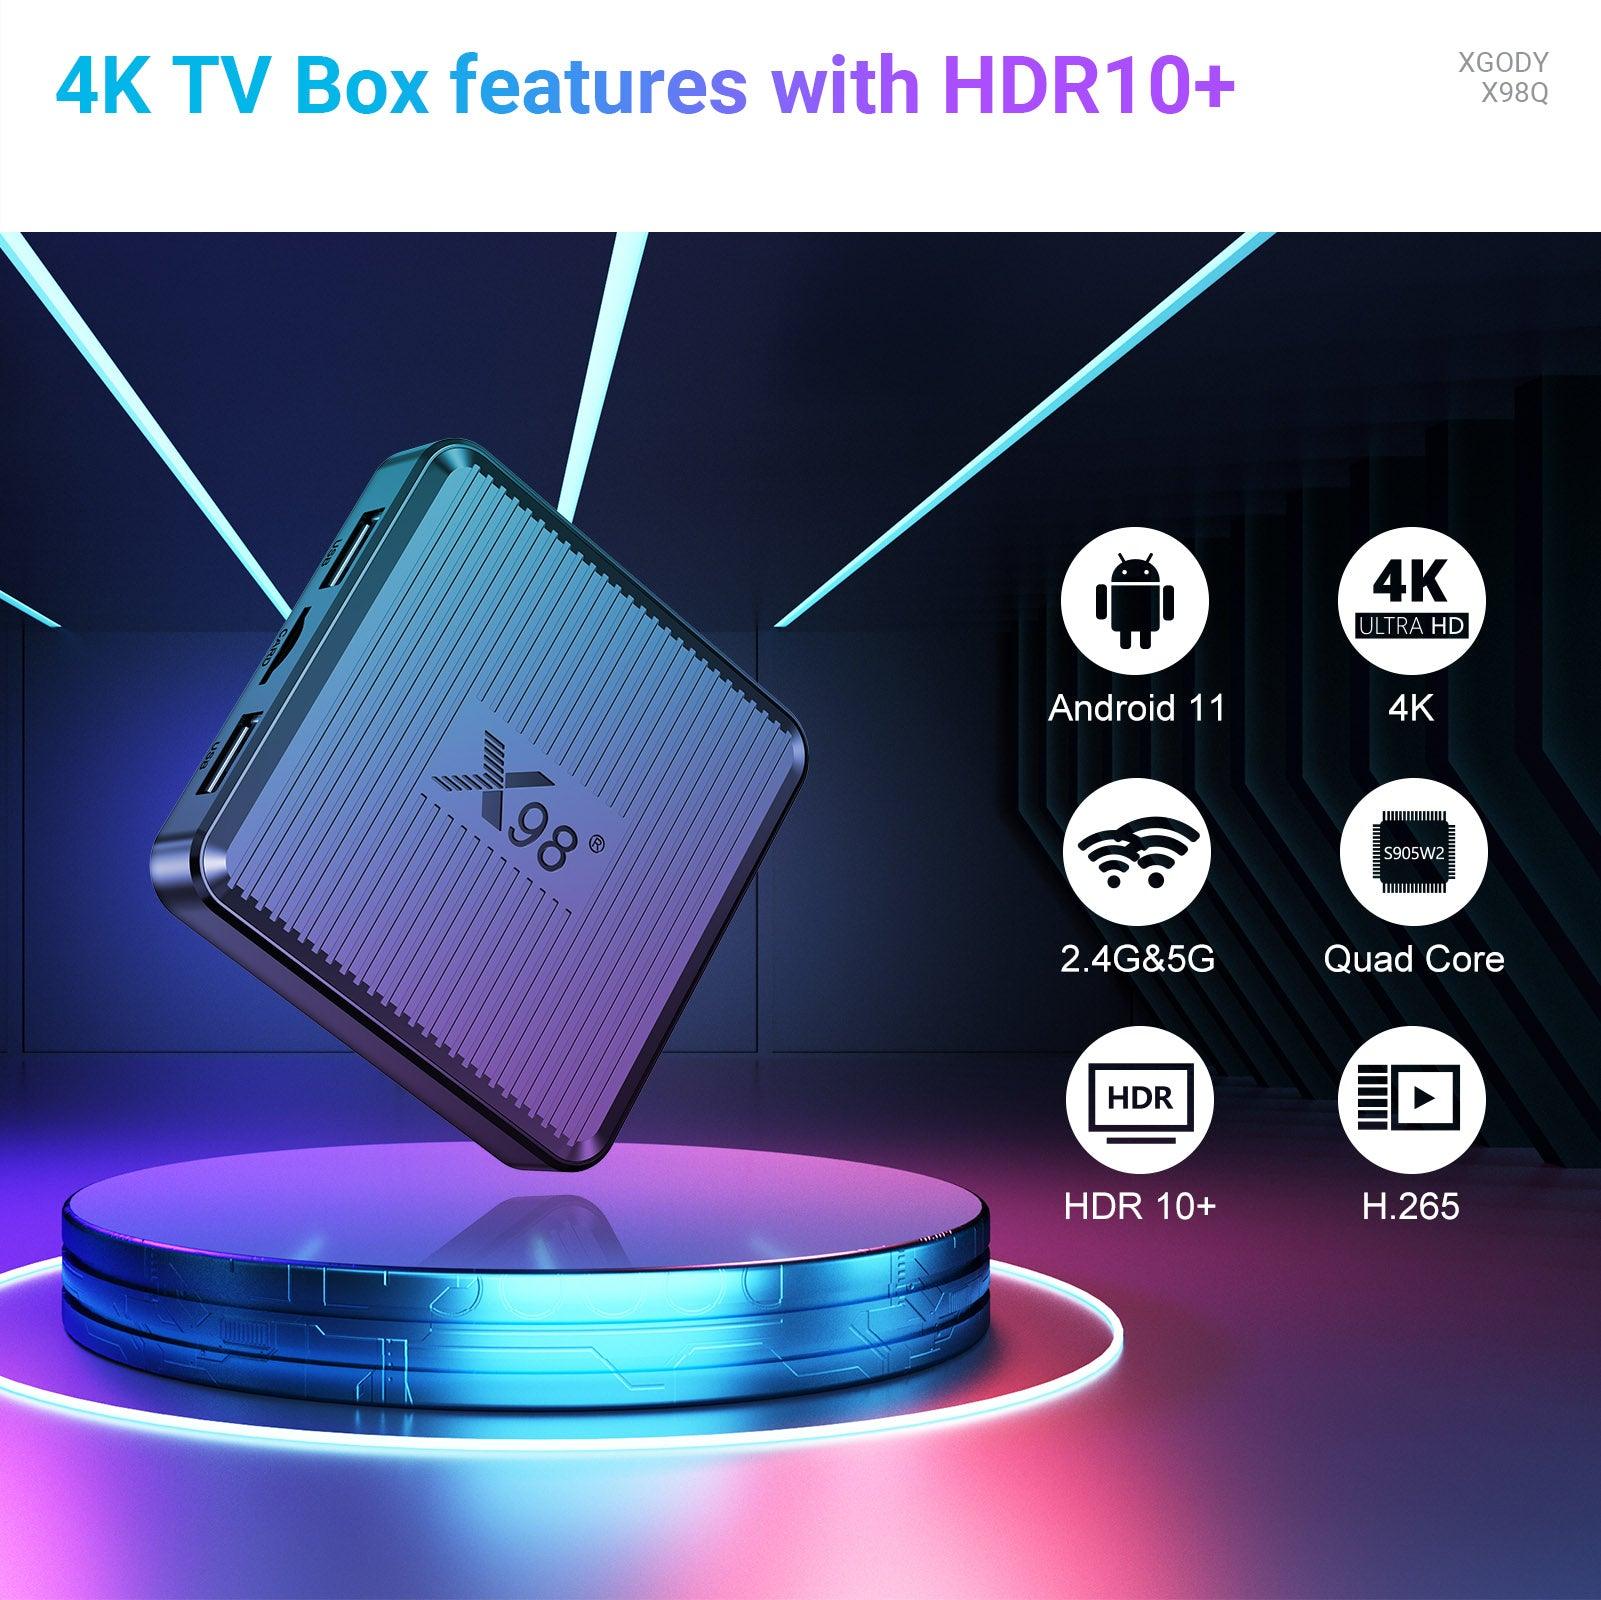 Cost-effective and Most worthwhile X98Q HDMI Android 11.0 Smart TV Box 4K, 2.4/5G Dual WiFi & Bluetooth, 16GB build-in Disney, Netflix - XGODY 